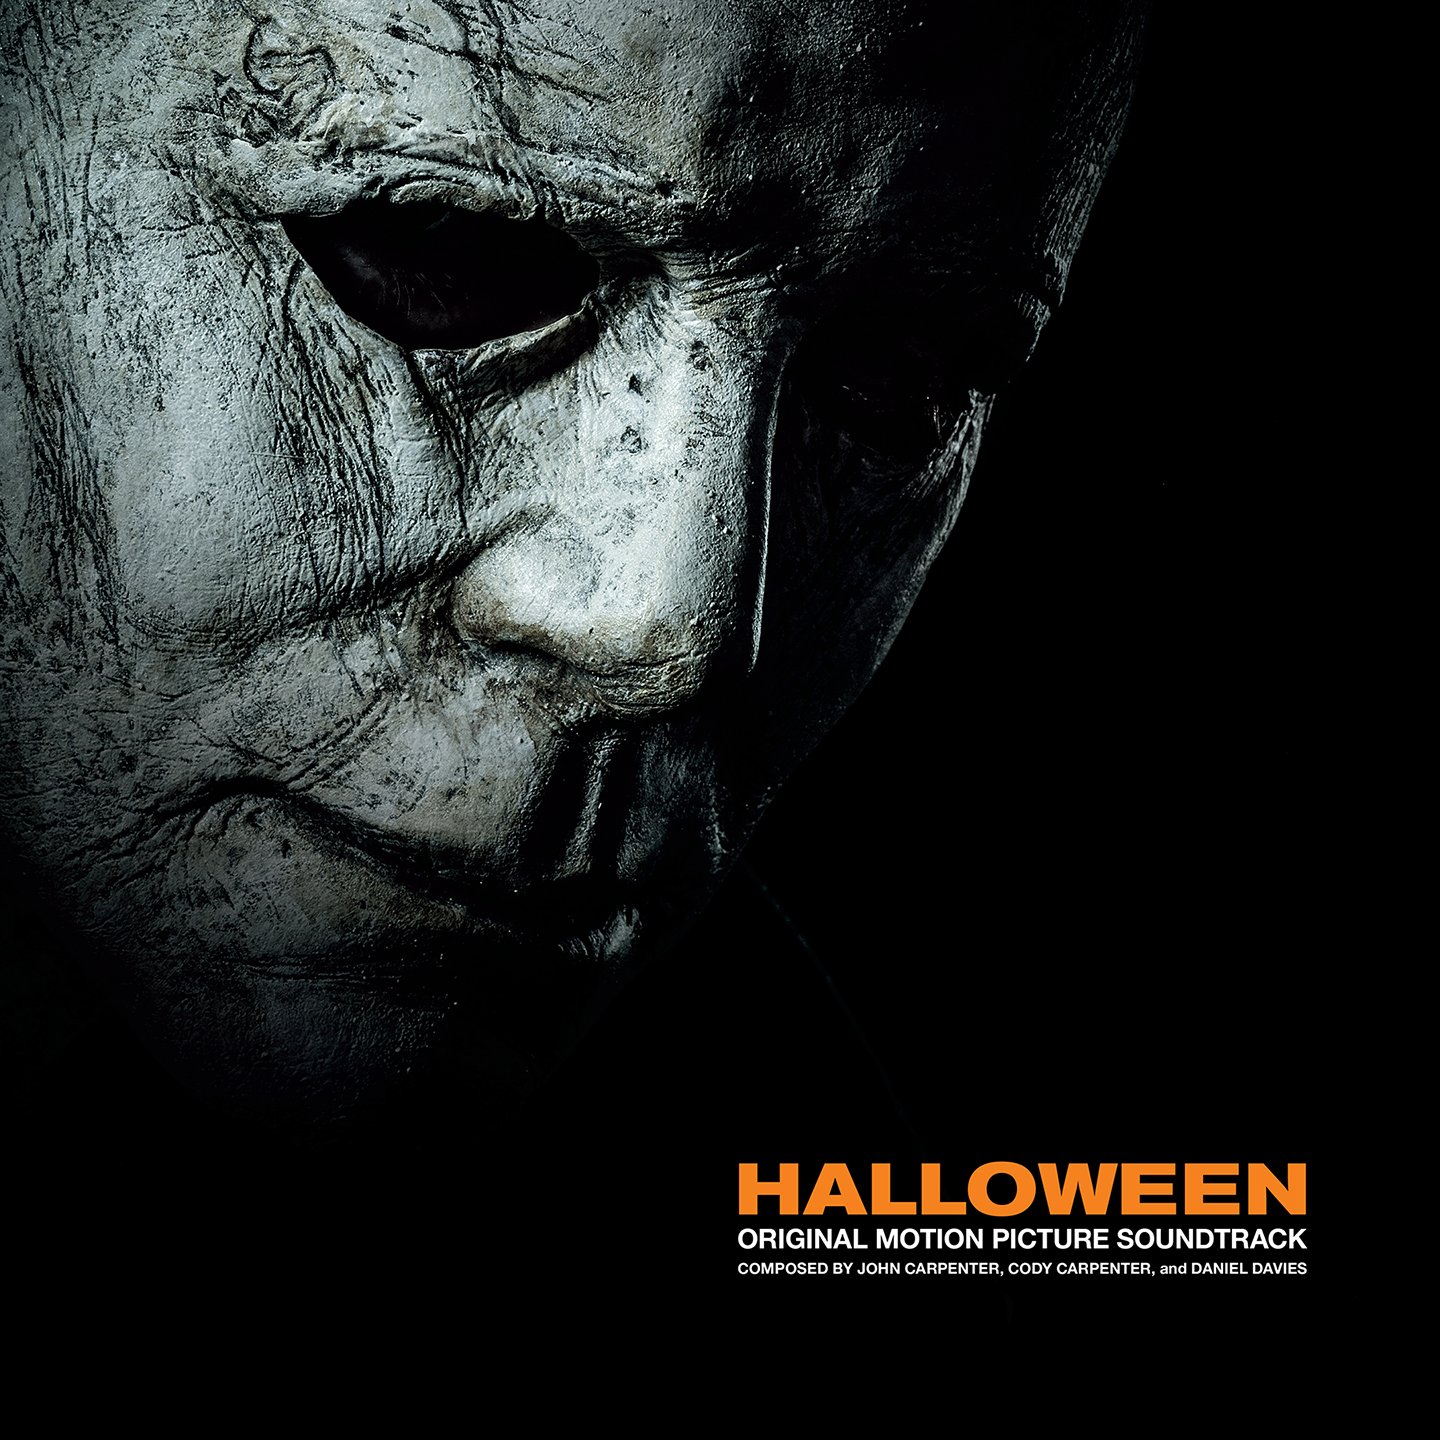 Halloween 2018 (Movie Review)